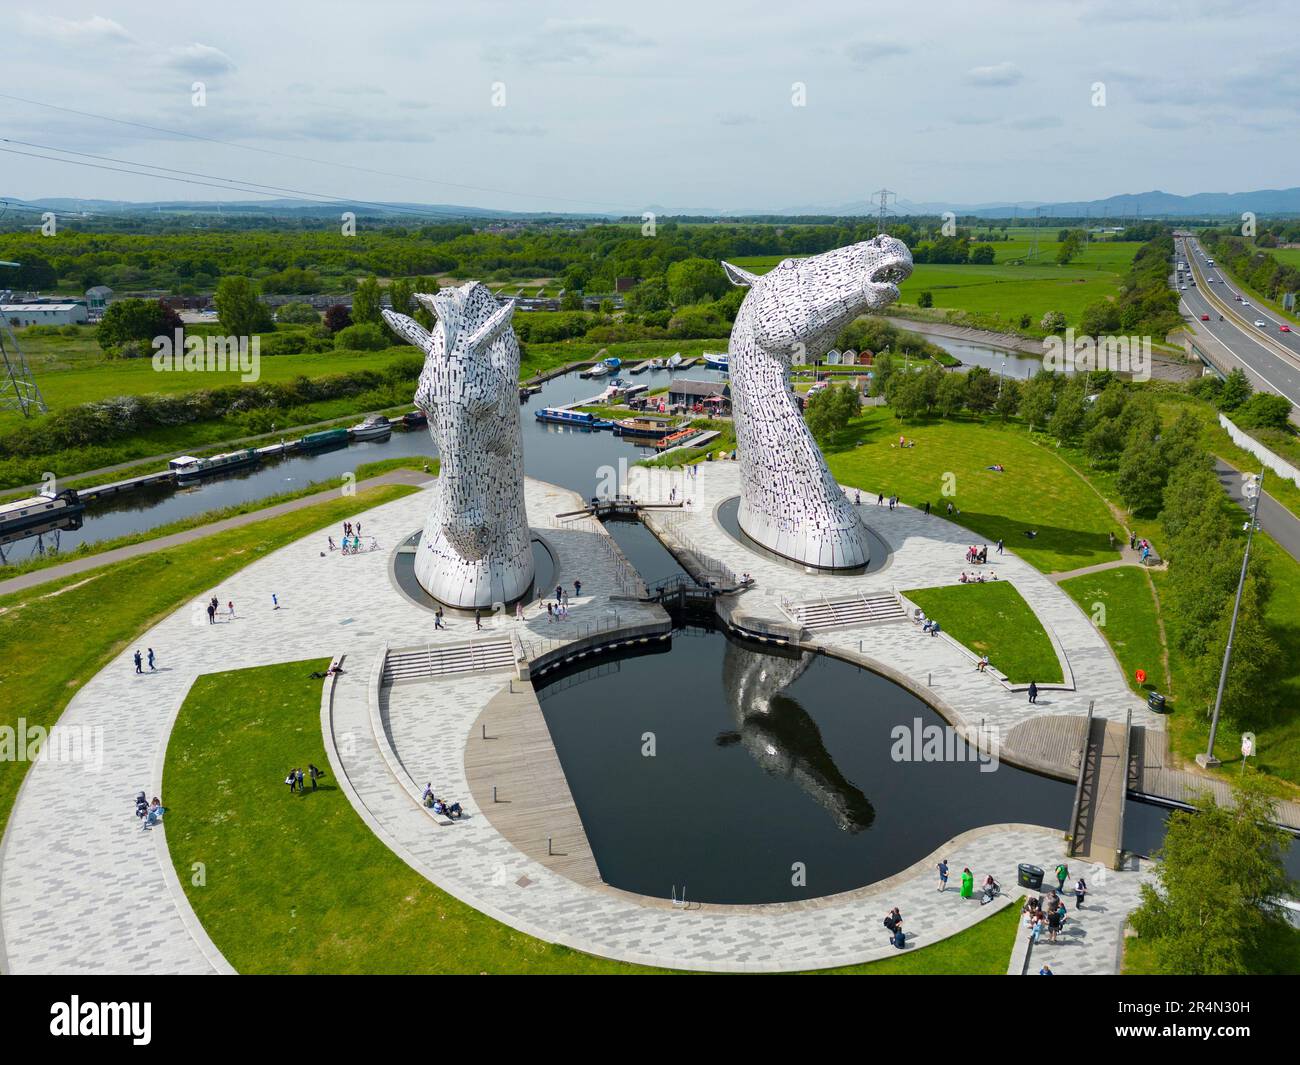 Aerial view of The Kelpies horse sculptures in Helix park in Falkirk, Scotland, UK Stock Photo